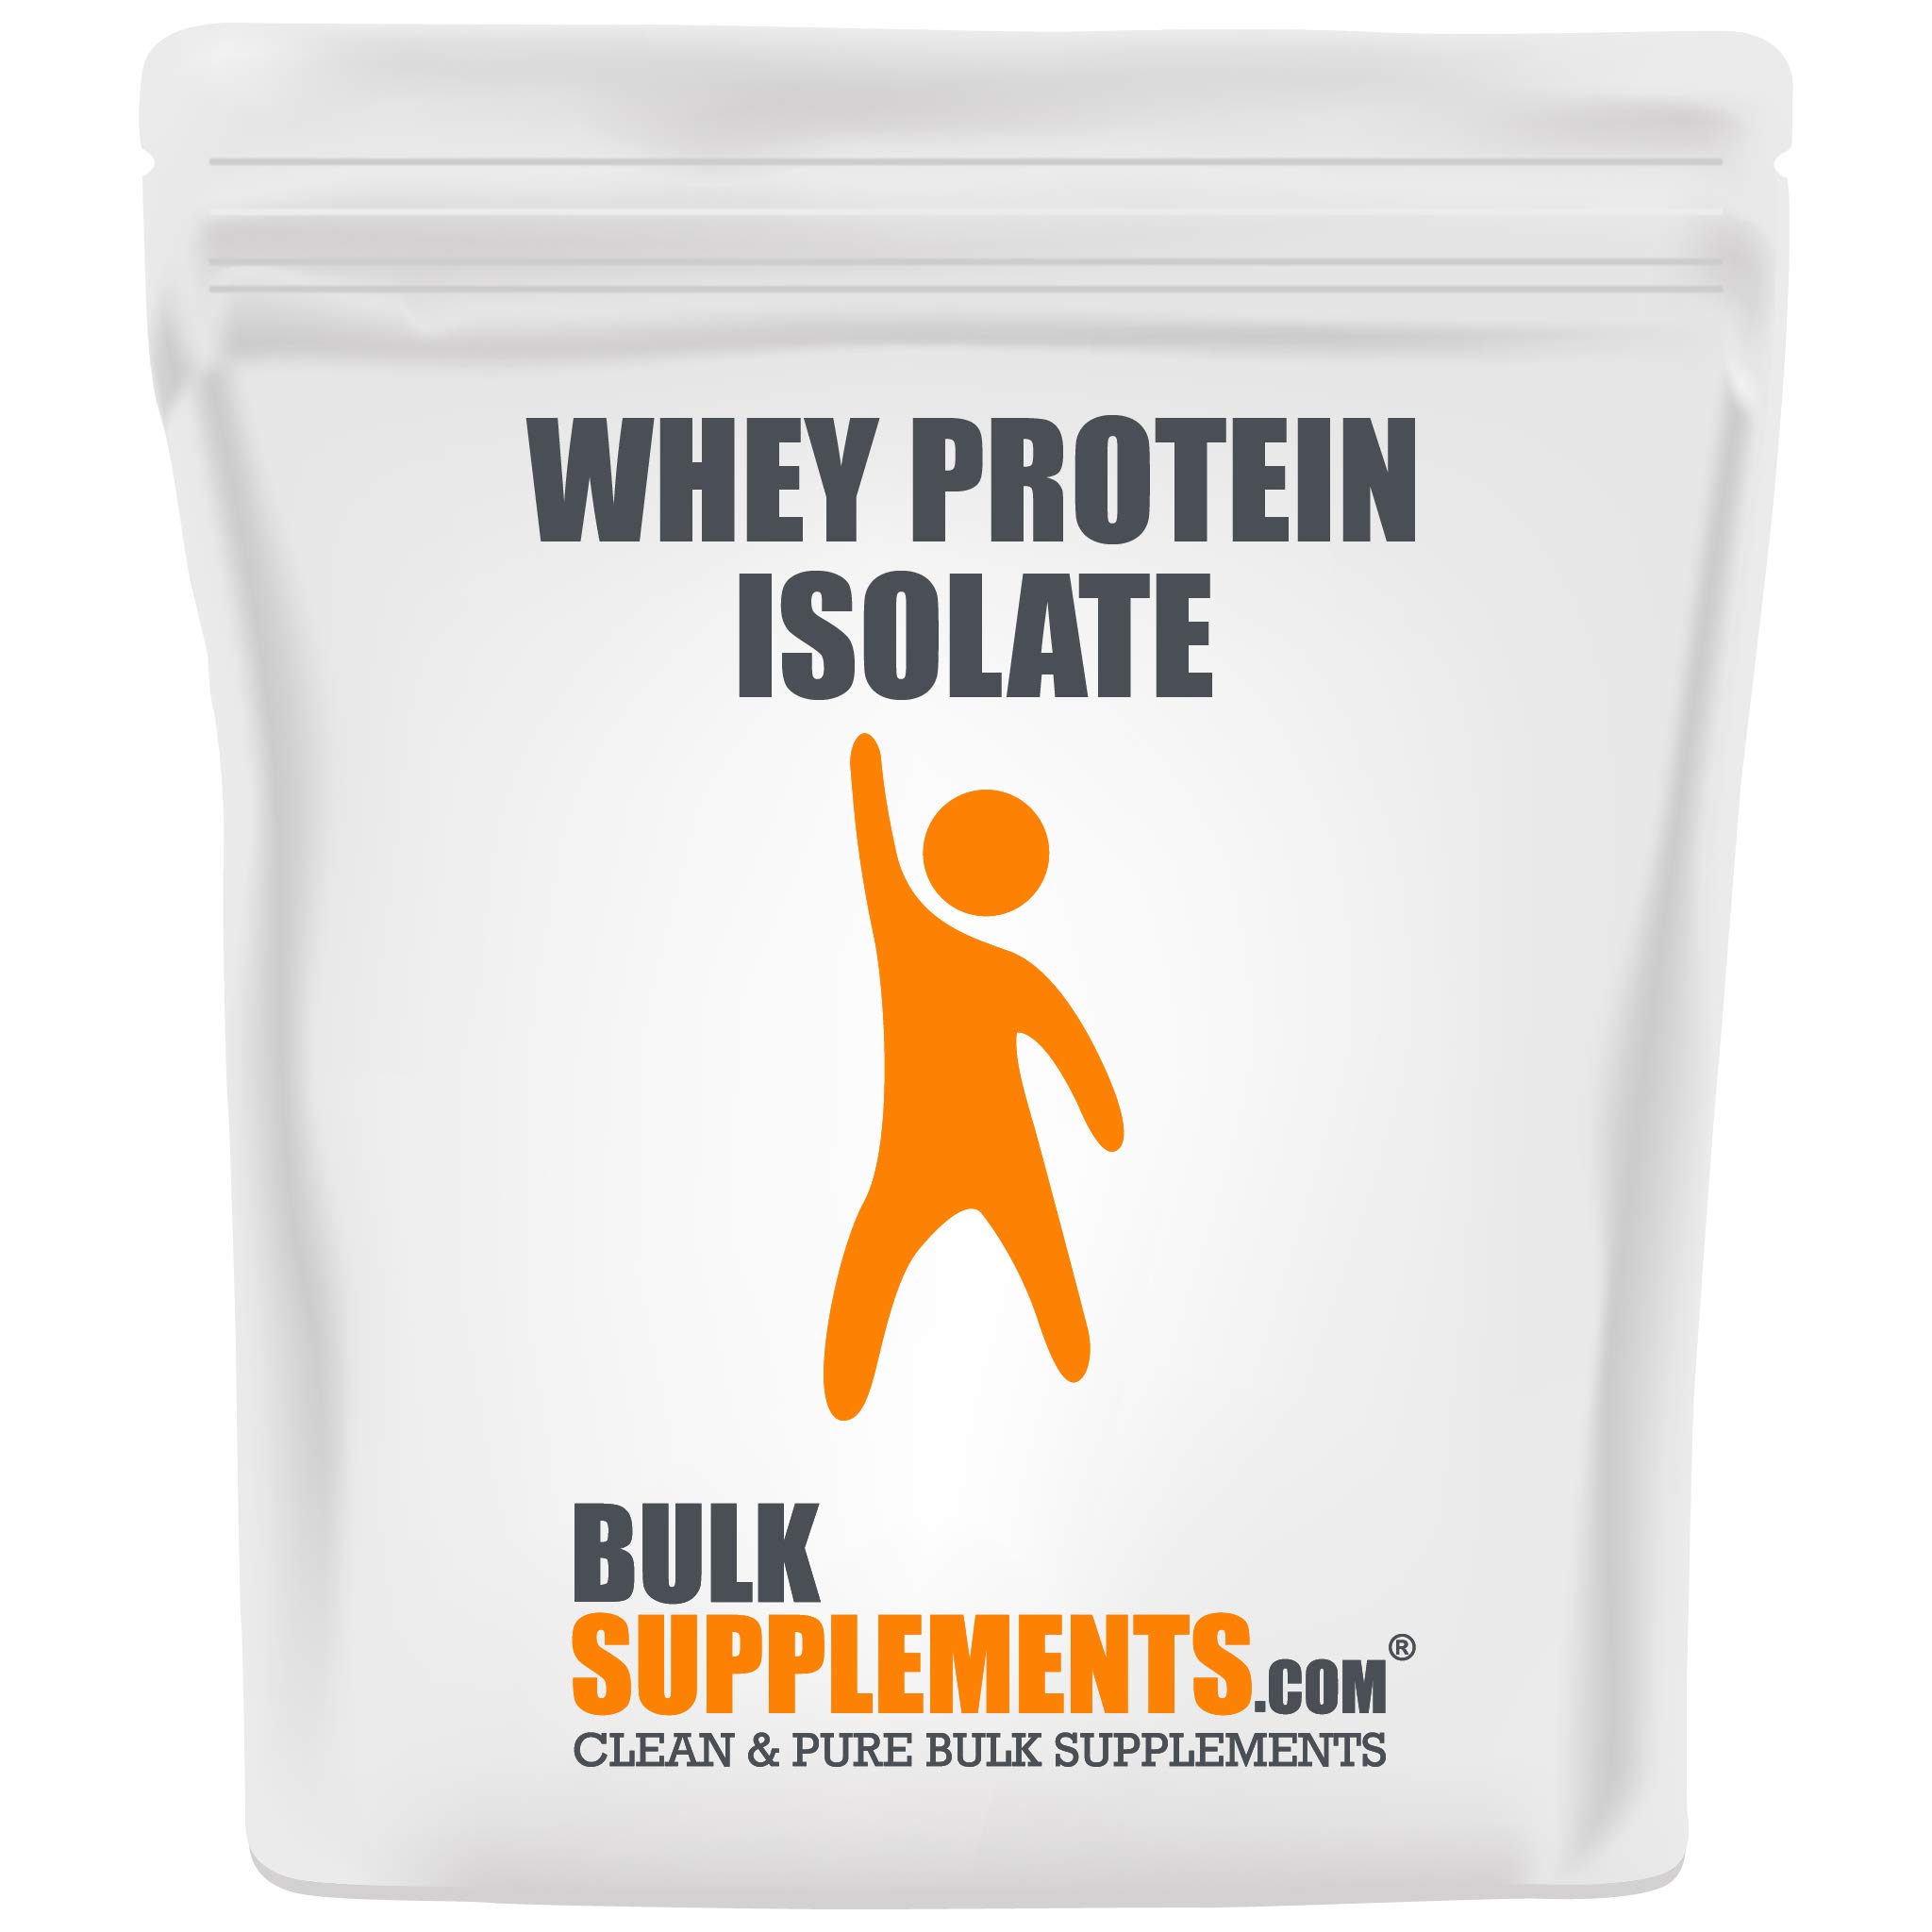 Calories in Bulk Supplements Whey Protein Isolate 90% and Nutrition Facts